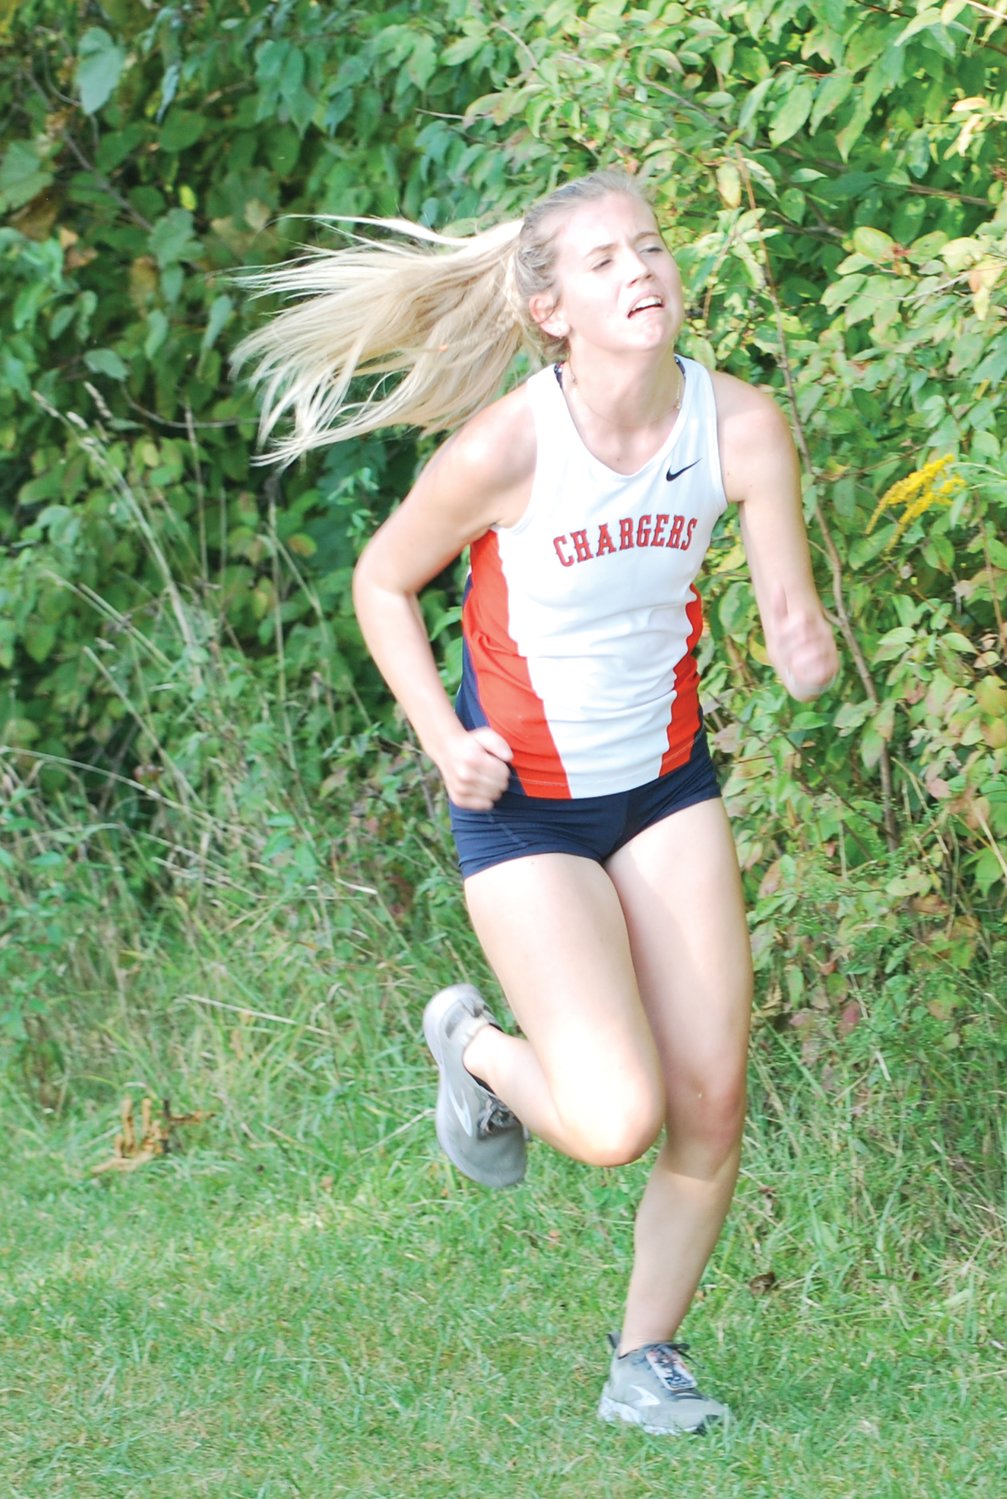 North Montgomery's Claire Bonwell placed third for the Chargers in the girls' race.